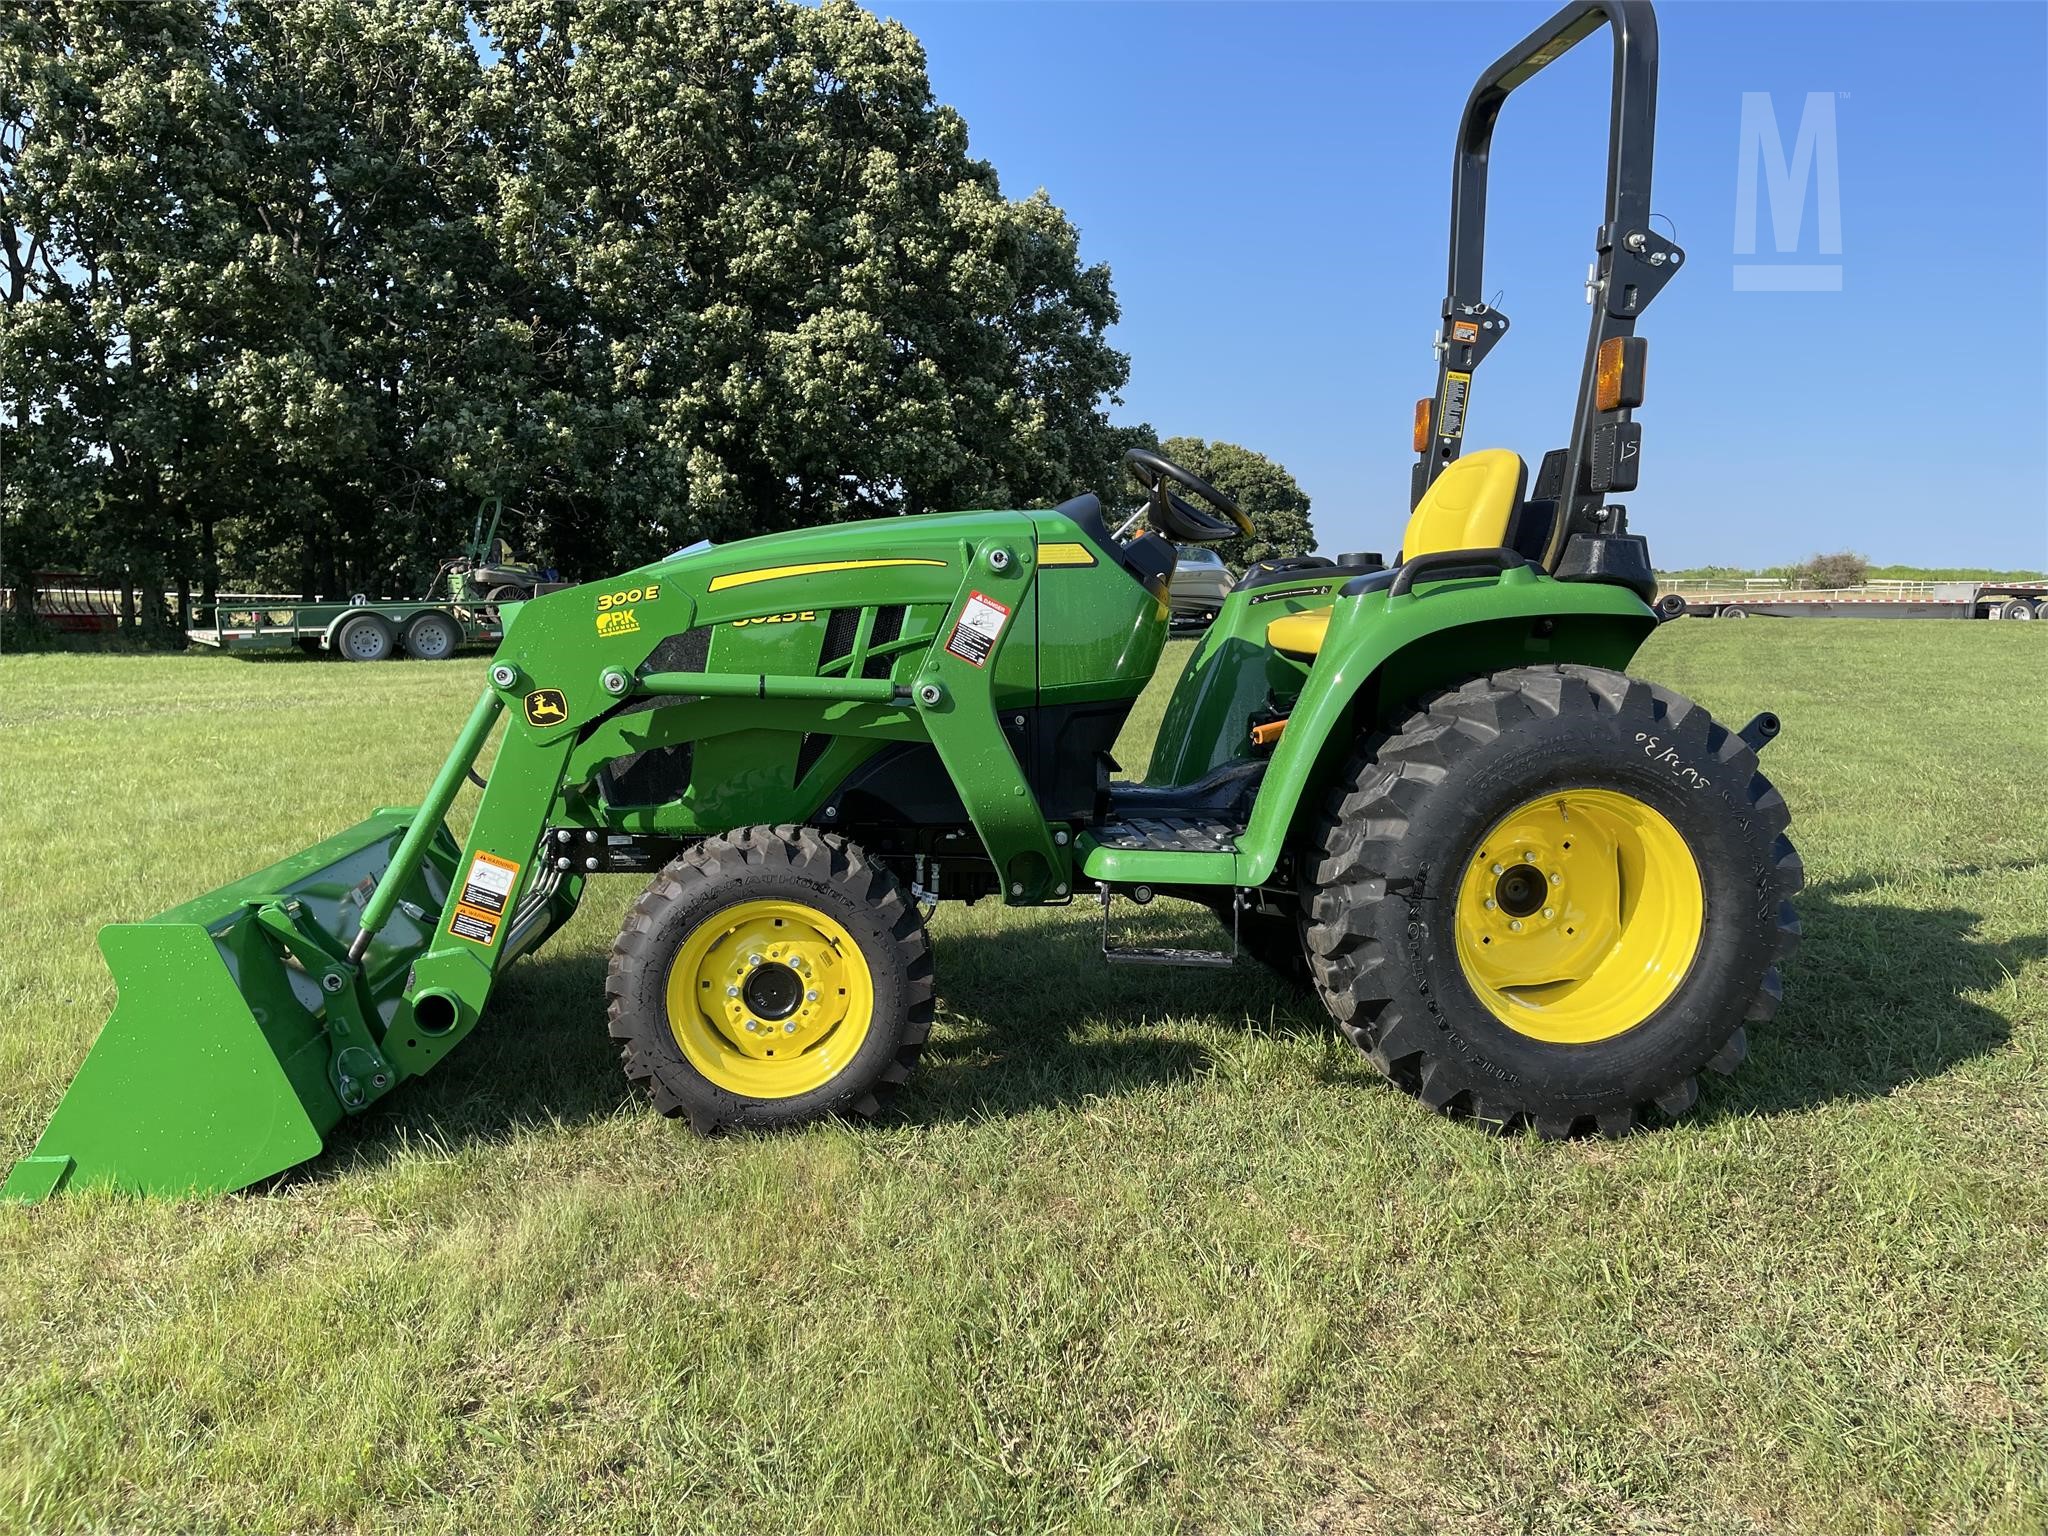 John Deere 3025e For Sale 122 Listings Marketbook Ca Page 1 Of 5